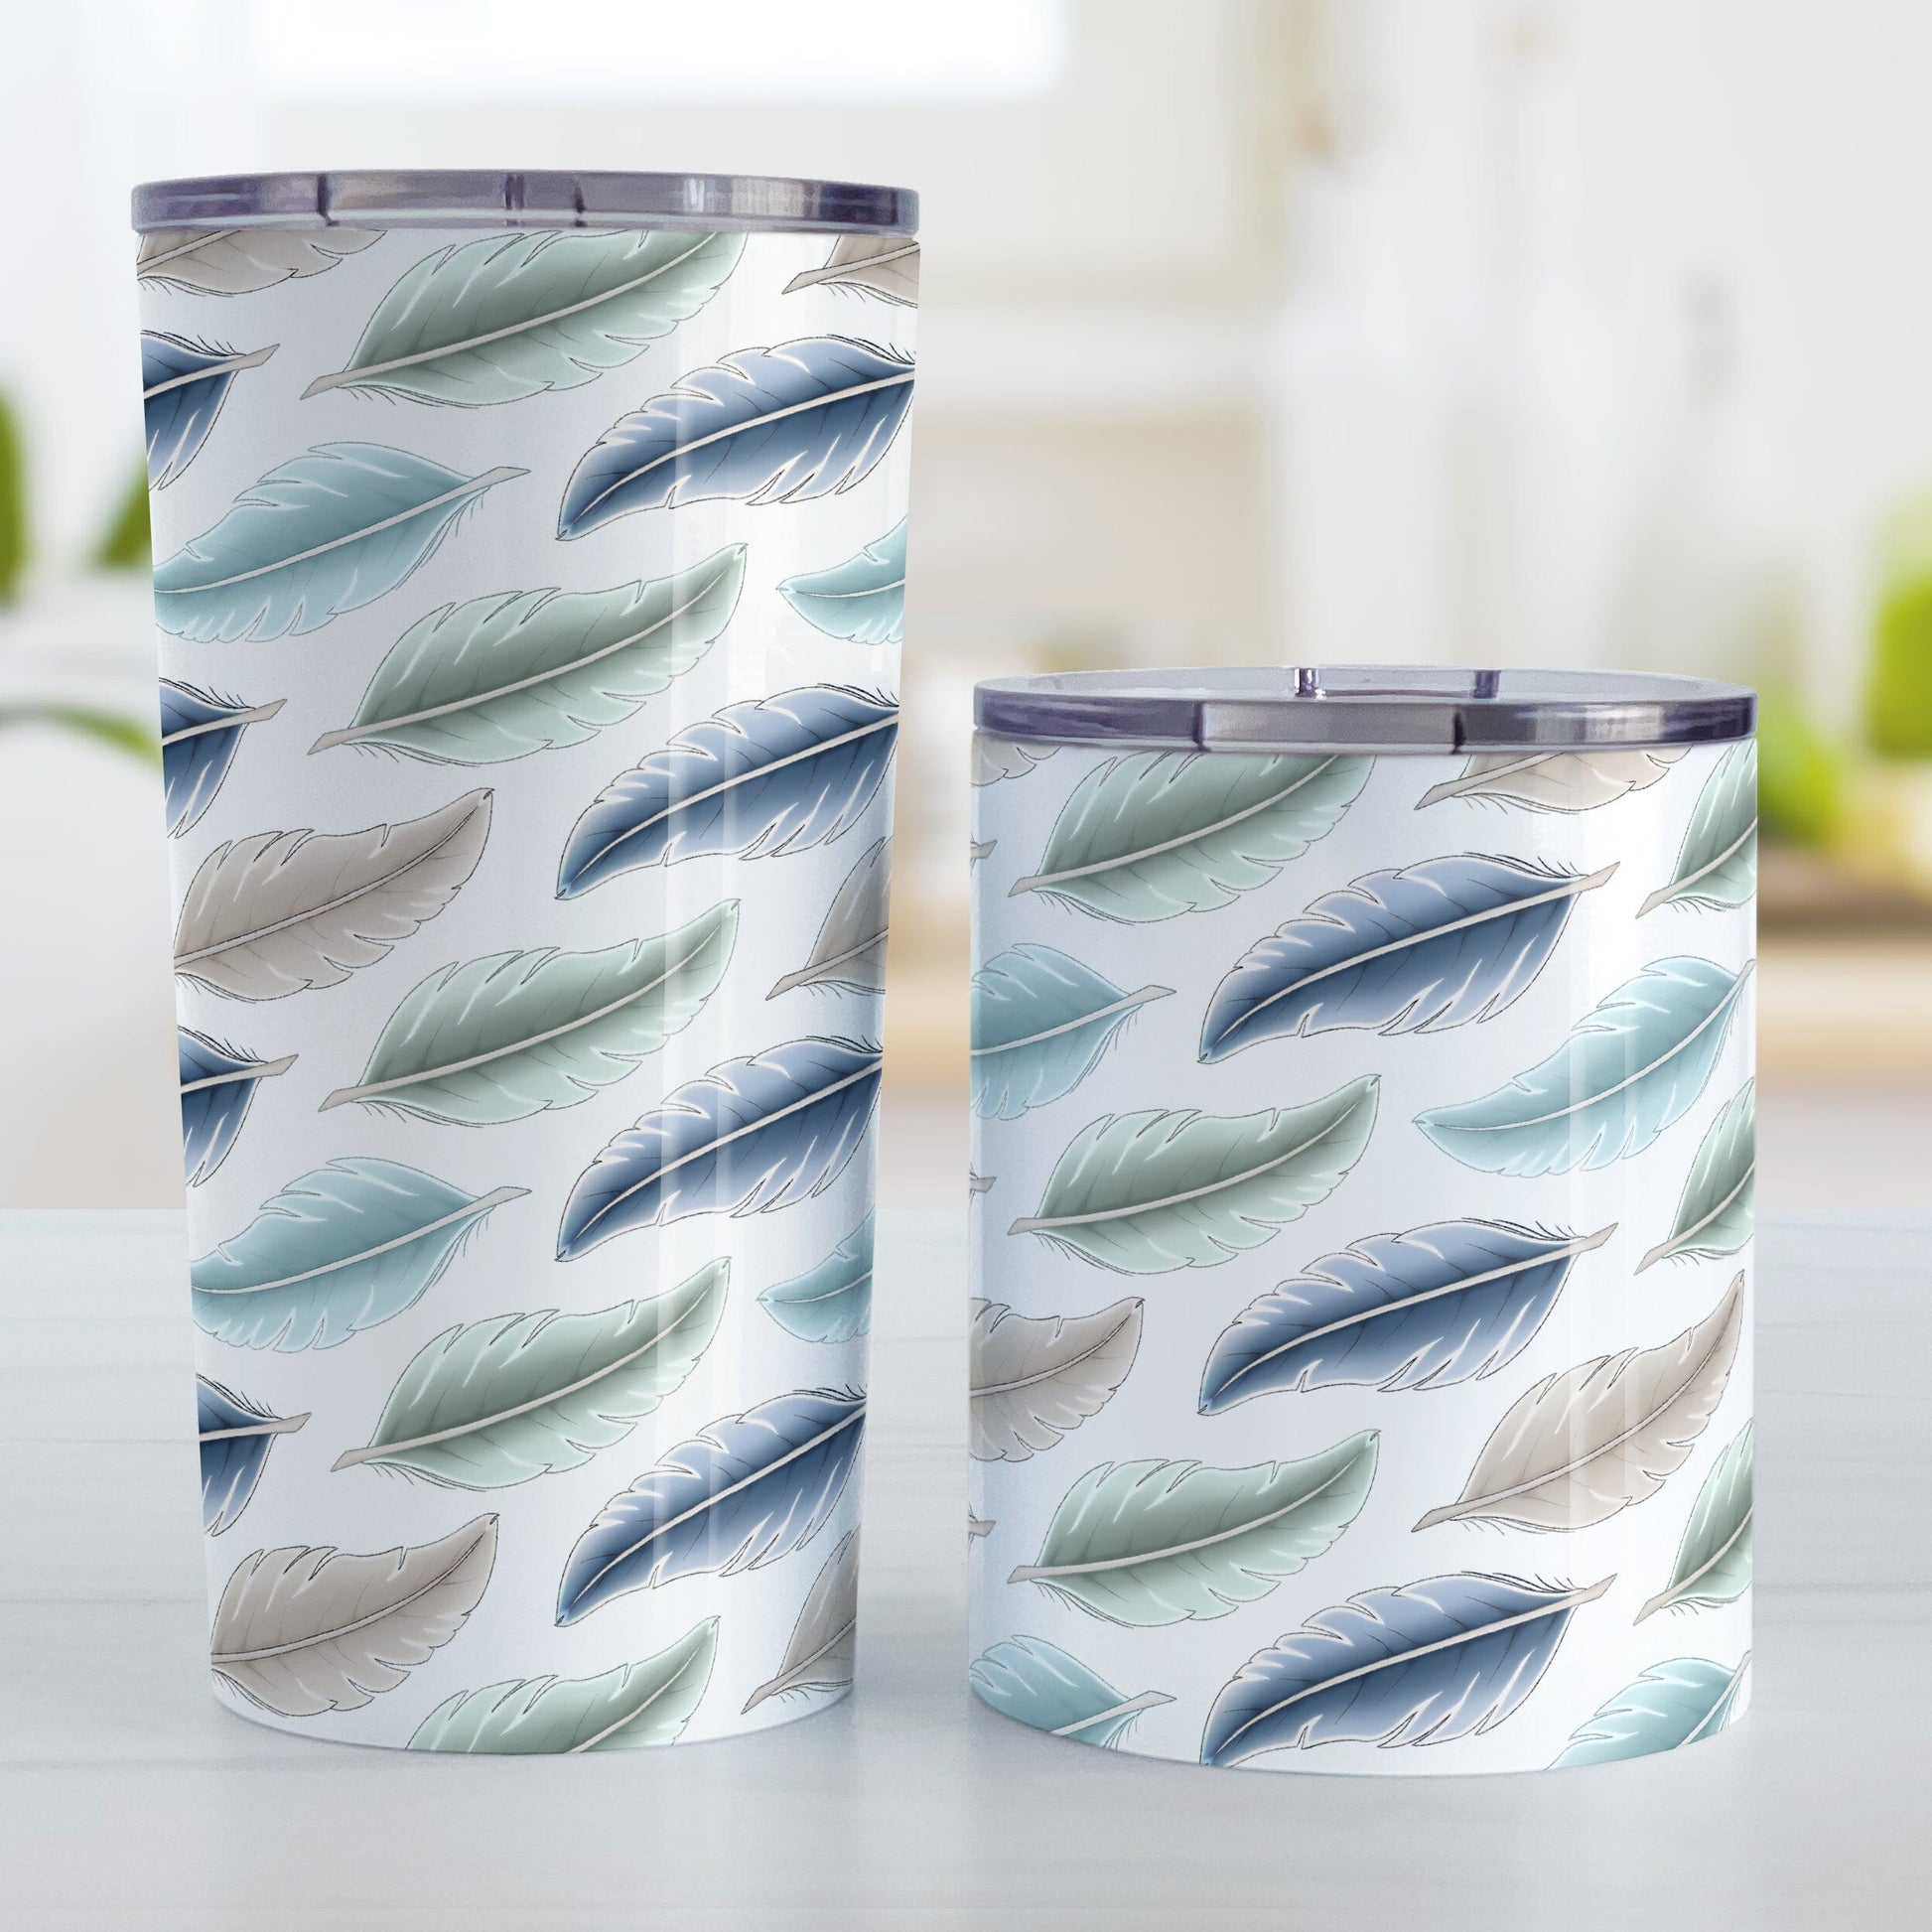 Coastal Feathers Tumbler Cup (20oz or 10oz) at Amy's Coffee Mugs. Stainless steel tumbler cups designed with a pattern of feathers in a coastal color scheme that wraps around the cups. Photo shows both sized cups next to each other on a table.